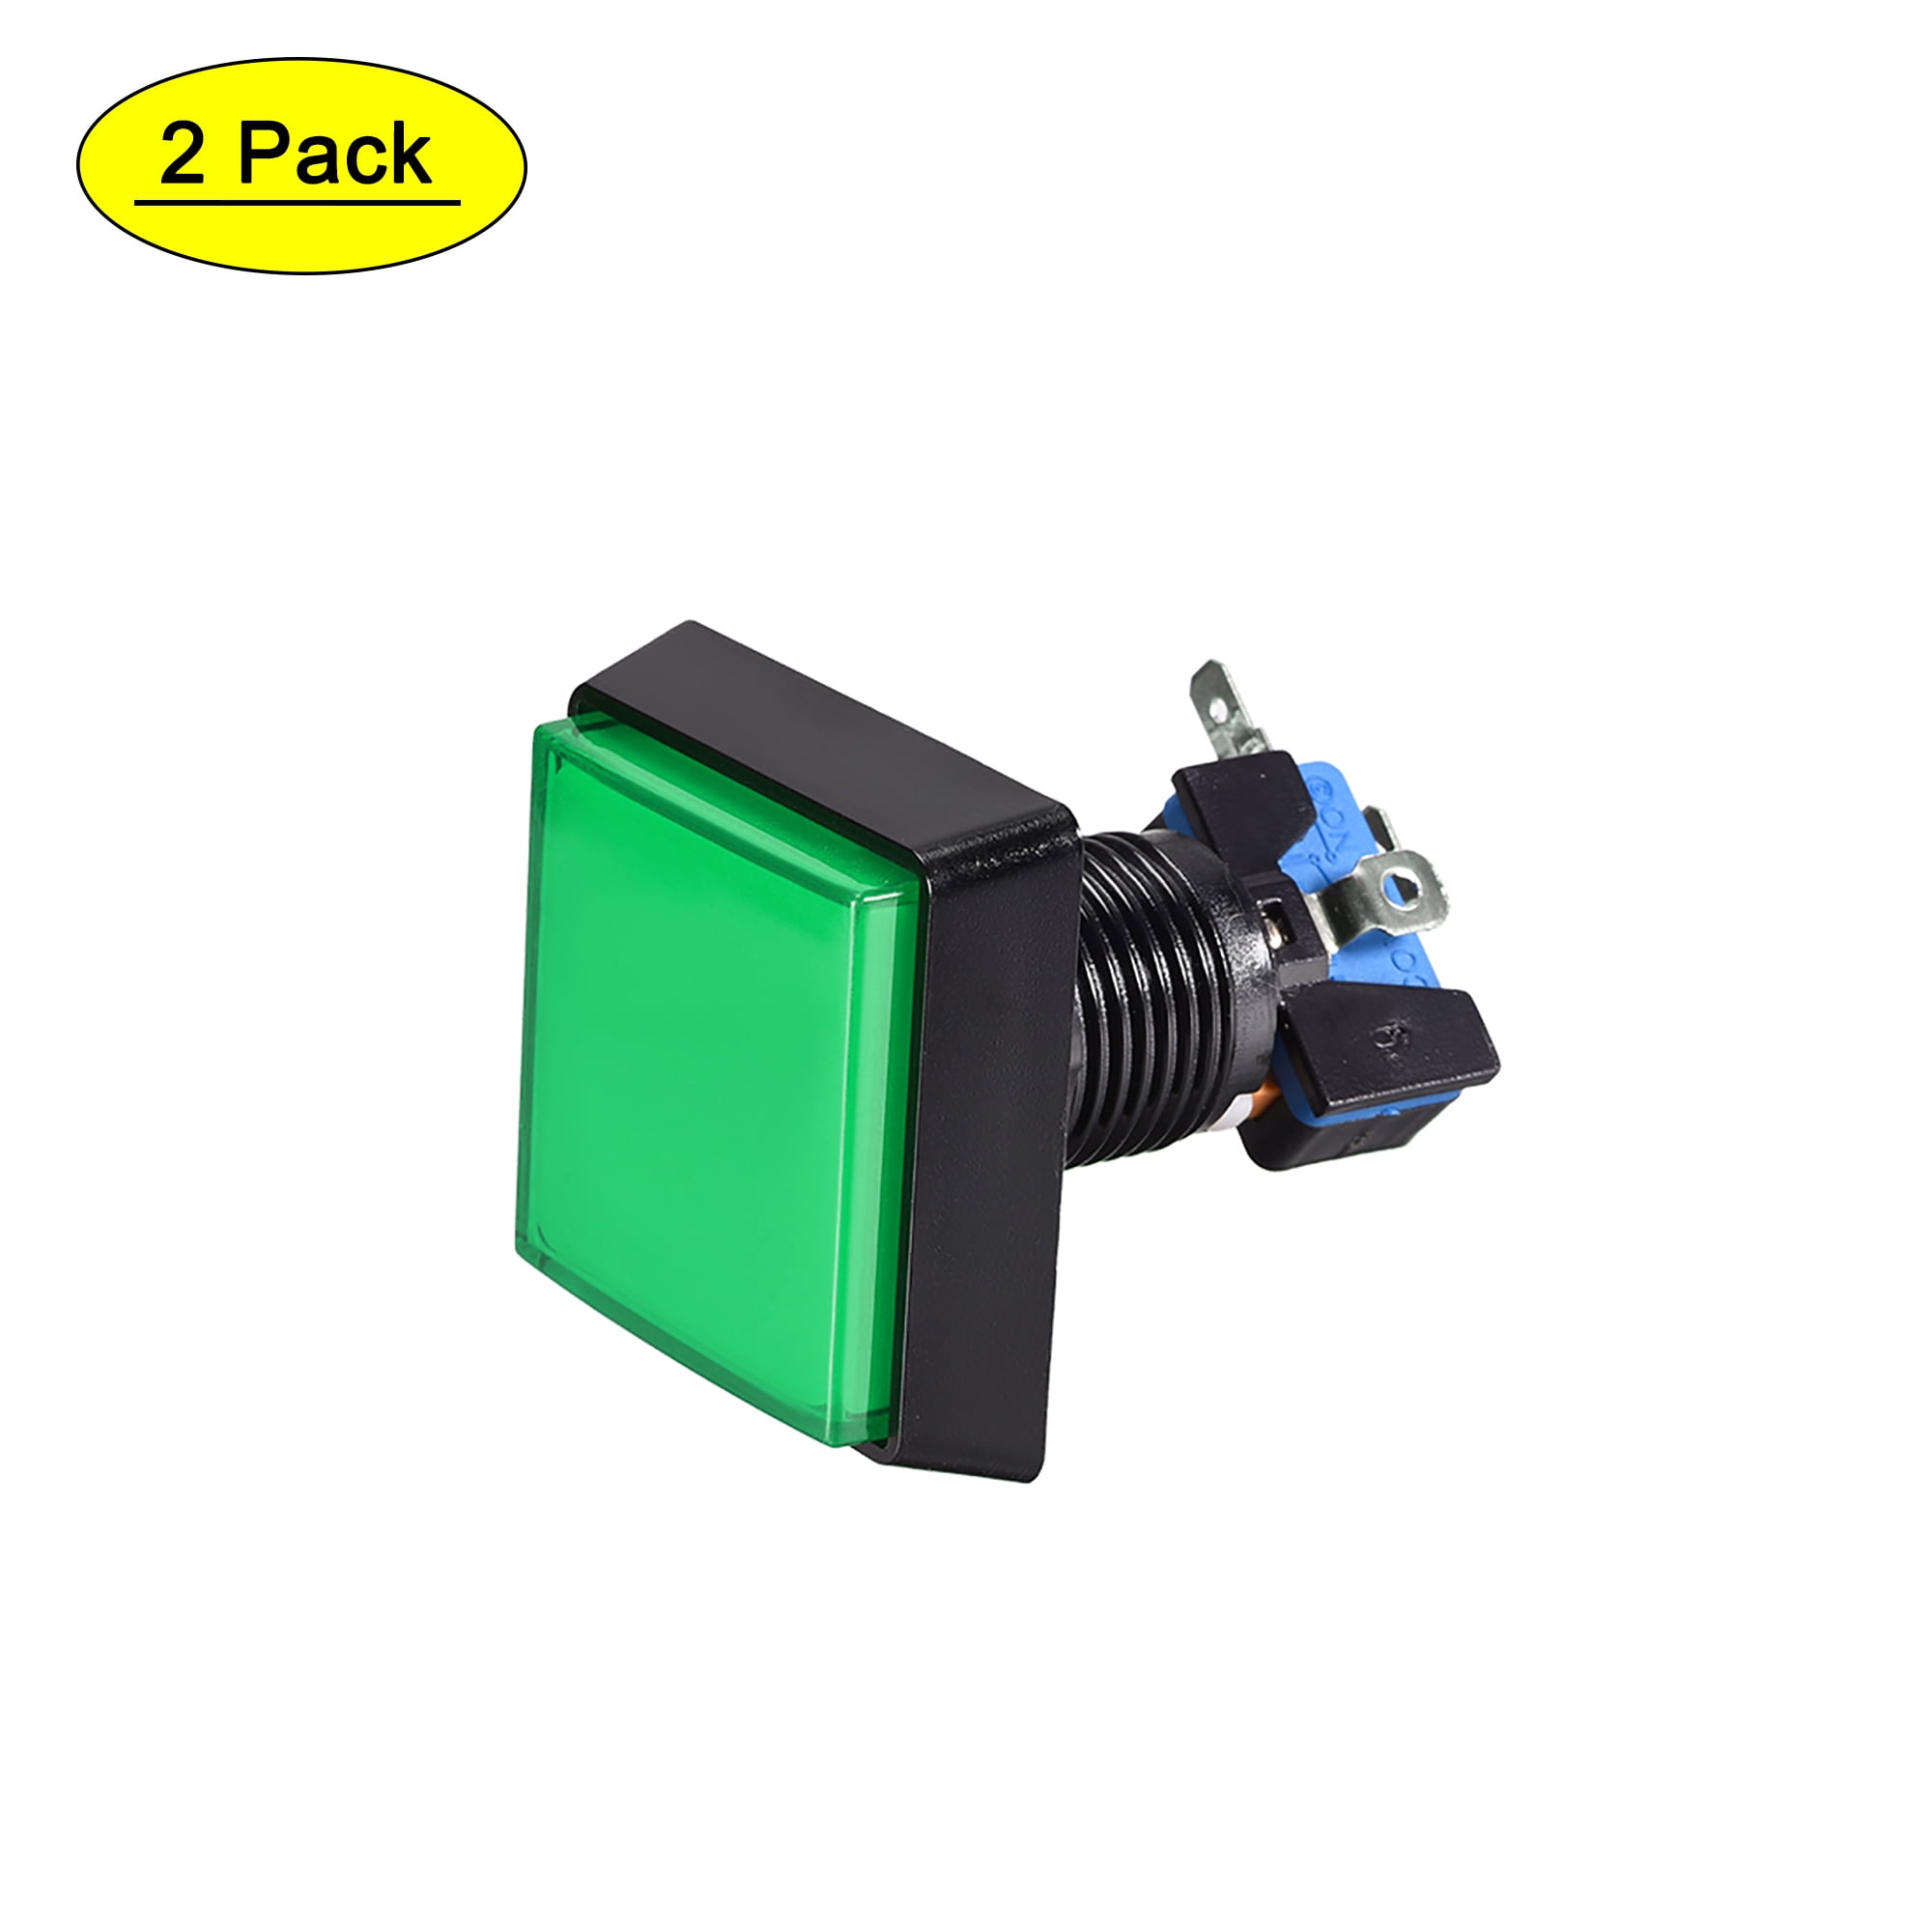 Game Push Button 50x50 Square 12V LED Illuminated Push Button Switch with  Micro switch for Arcade Video Green 2pcs